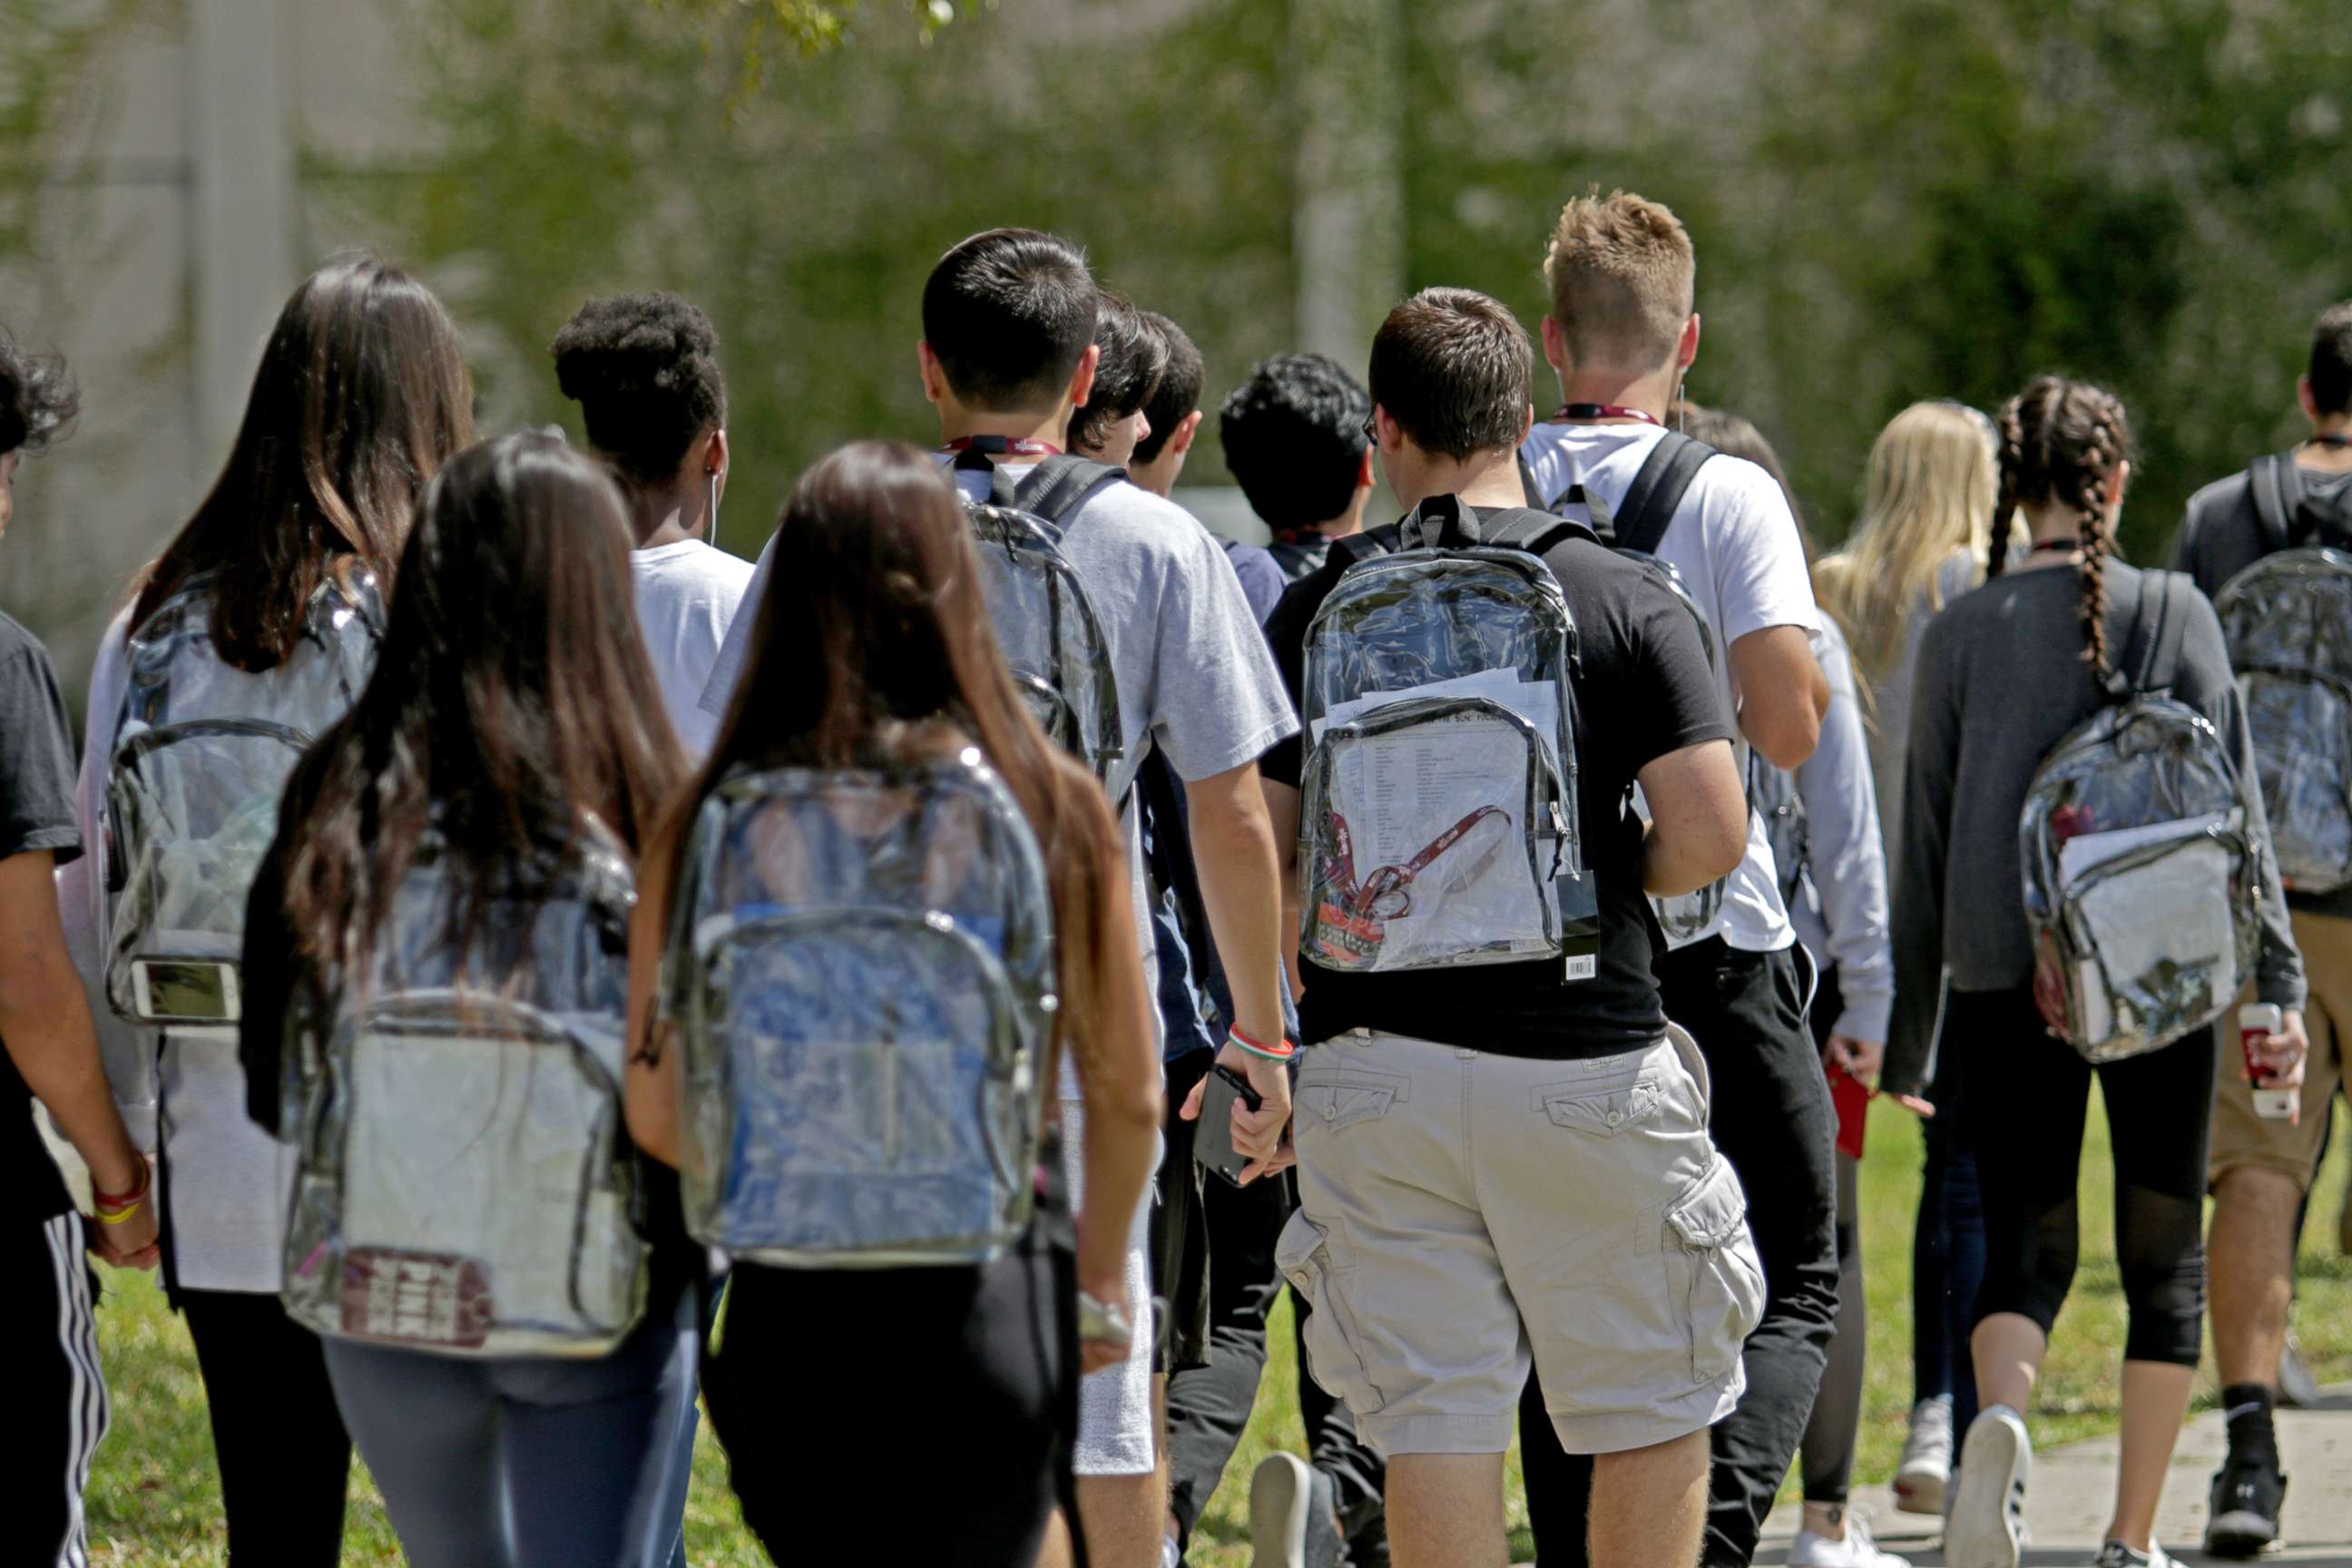 PHOTO: Students walk to school at Marjory Stoneman Douglas wearing clear backpacks, as part of their schools new security measures after the Feb. 14, 2018 shooting that killed 17 people, in Parkland, Fla., April 2, 2018.